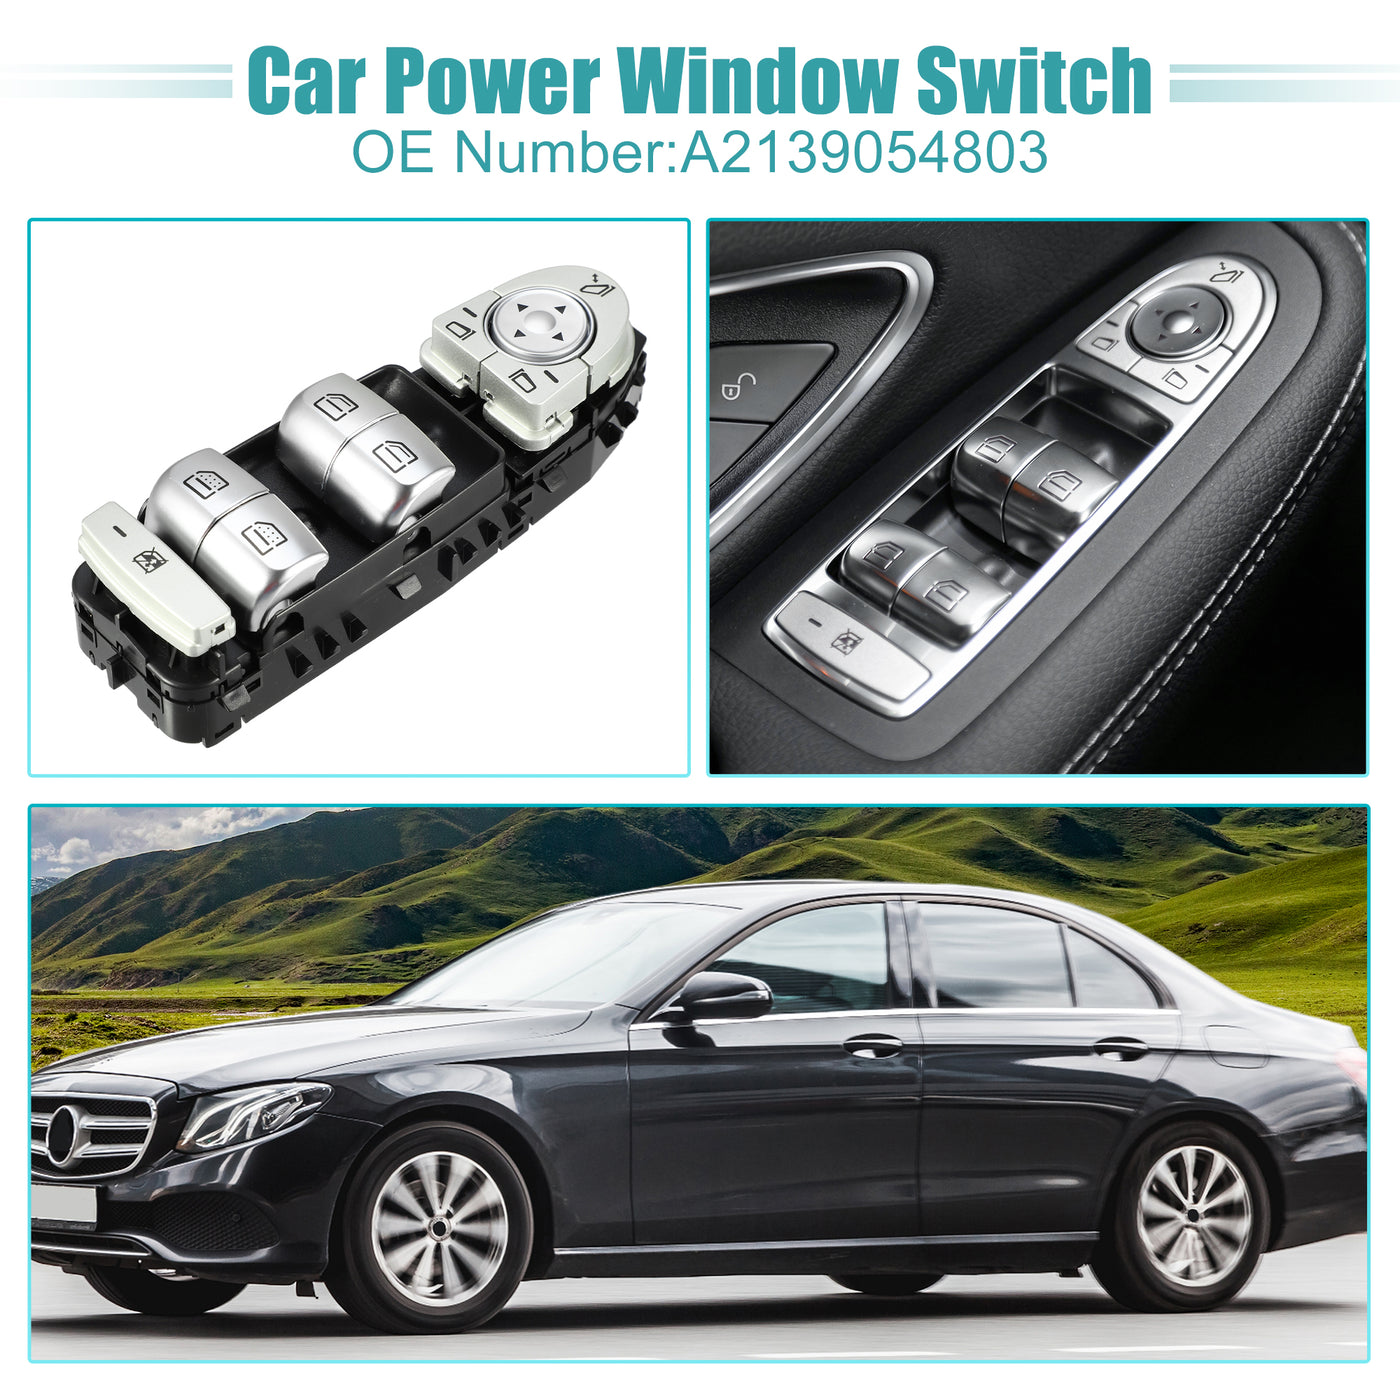 ACROPIX Power Window Switch Window Control Switch Black Fit for Mercedes-Benz E Class W213 2017 No.A2139054803 - Pack of 1